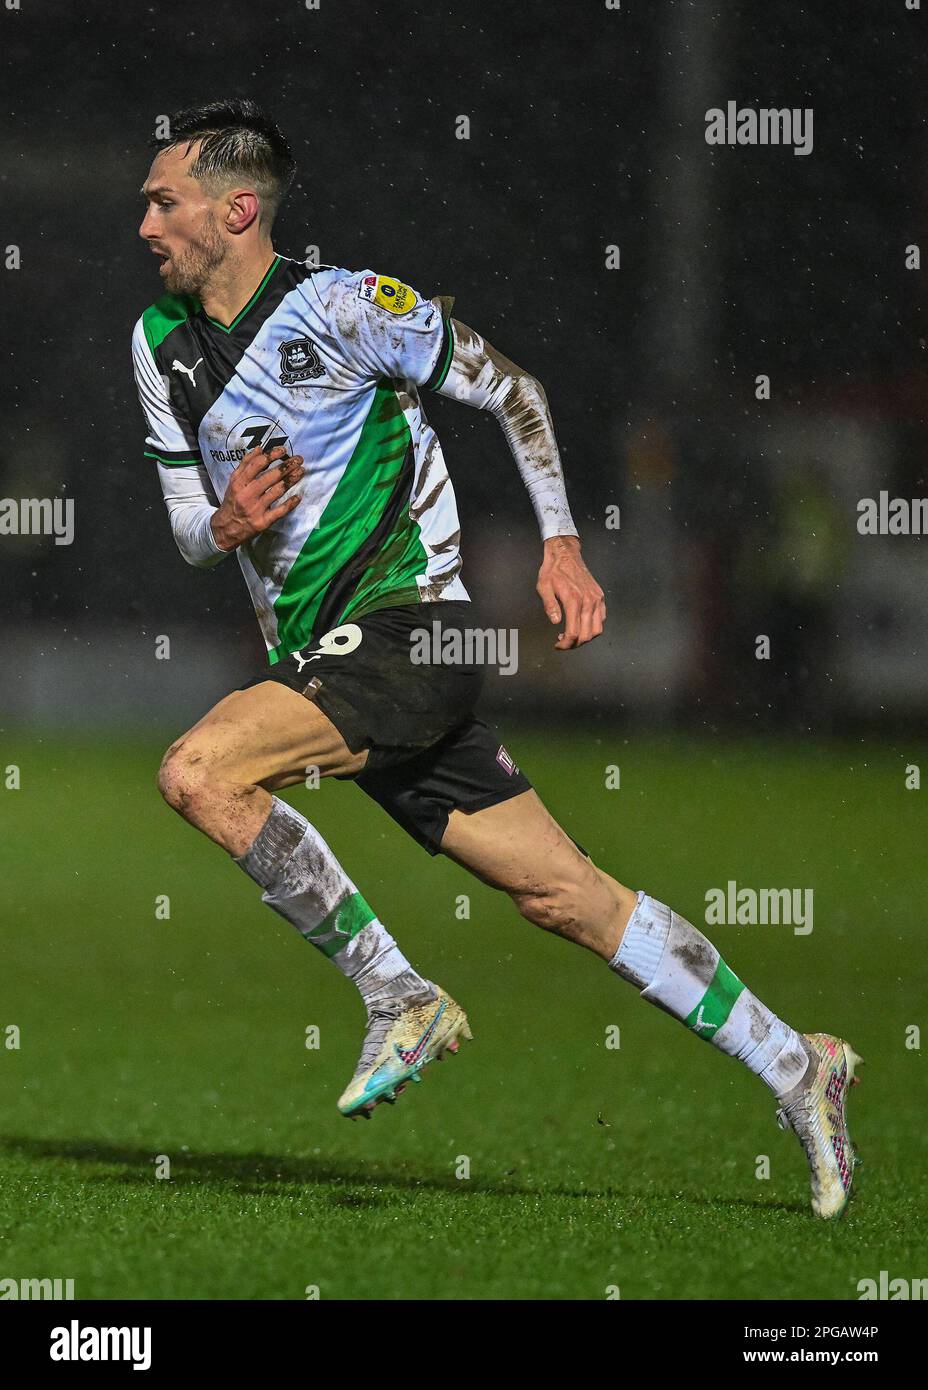 Ryan Hardie #9 of Plymouth Argyle  in action during the Sky Bet League 1 match Accrington Stanley vs Plymouth Argyle at Wham Stadium, Accrington, United Kingdom, 21st March 2023  (Photo by Stan Kasala/News Images) Stock Photo